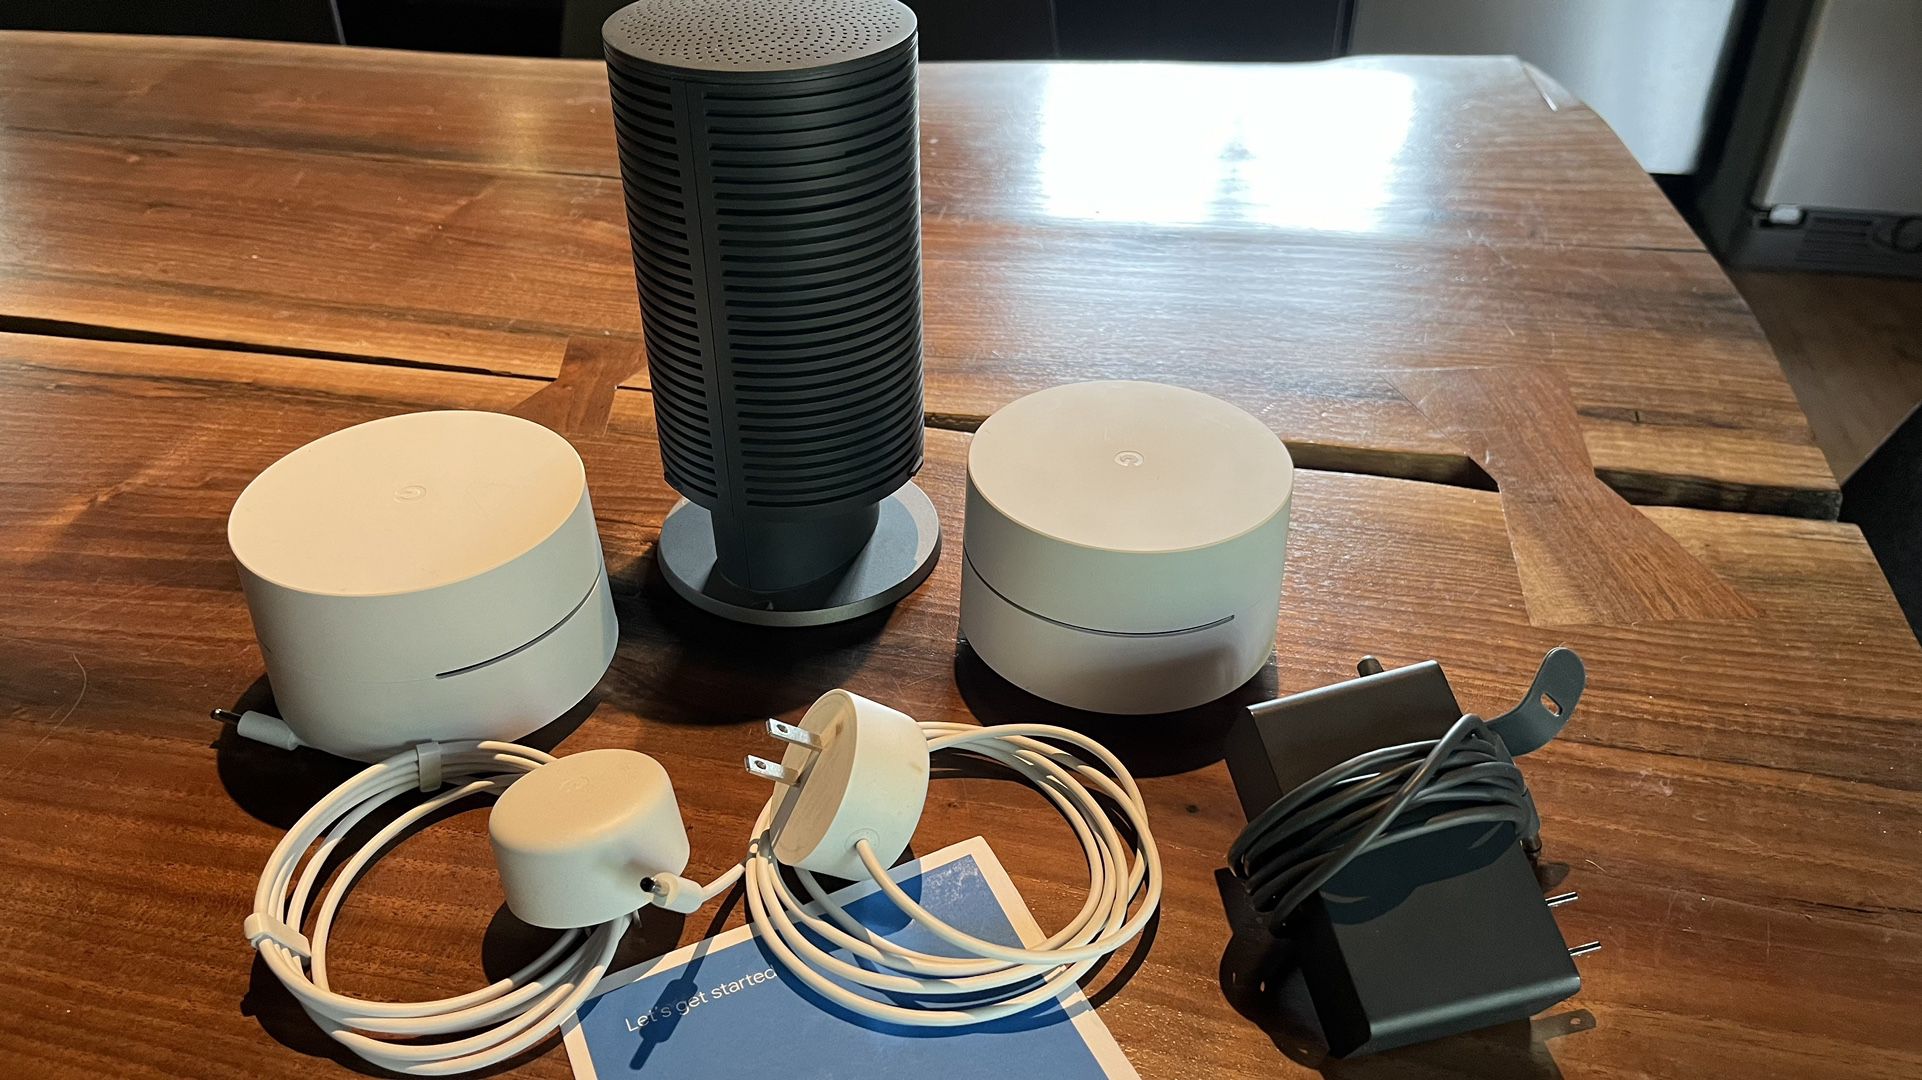 Google WiFi Router W/ Two Repeaters 